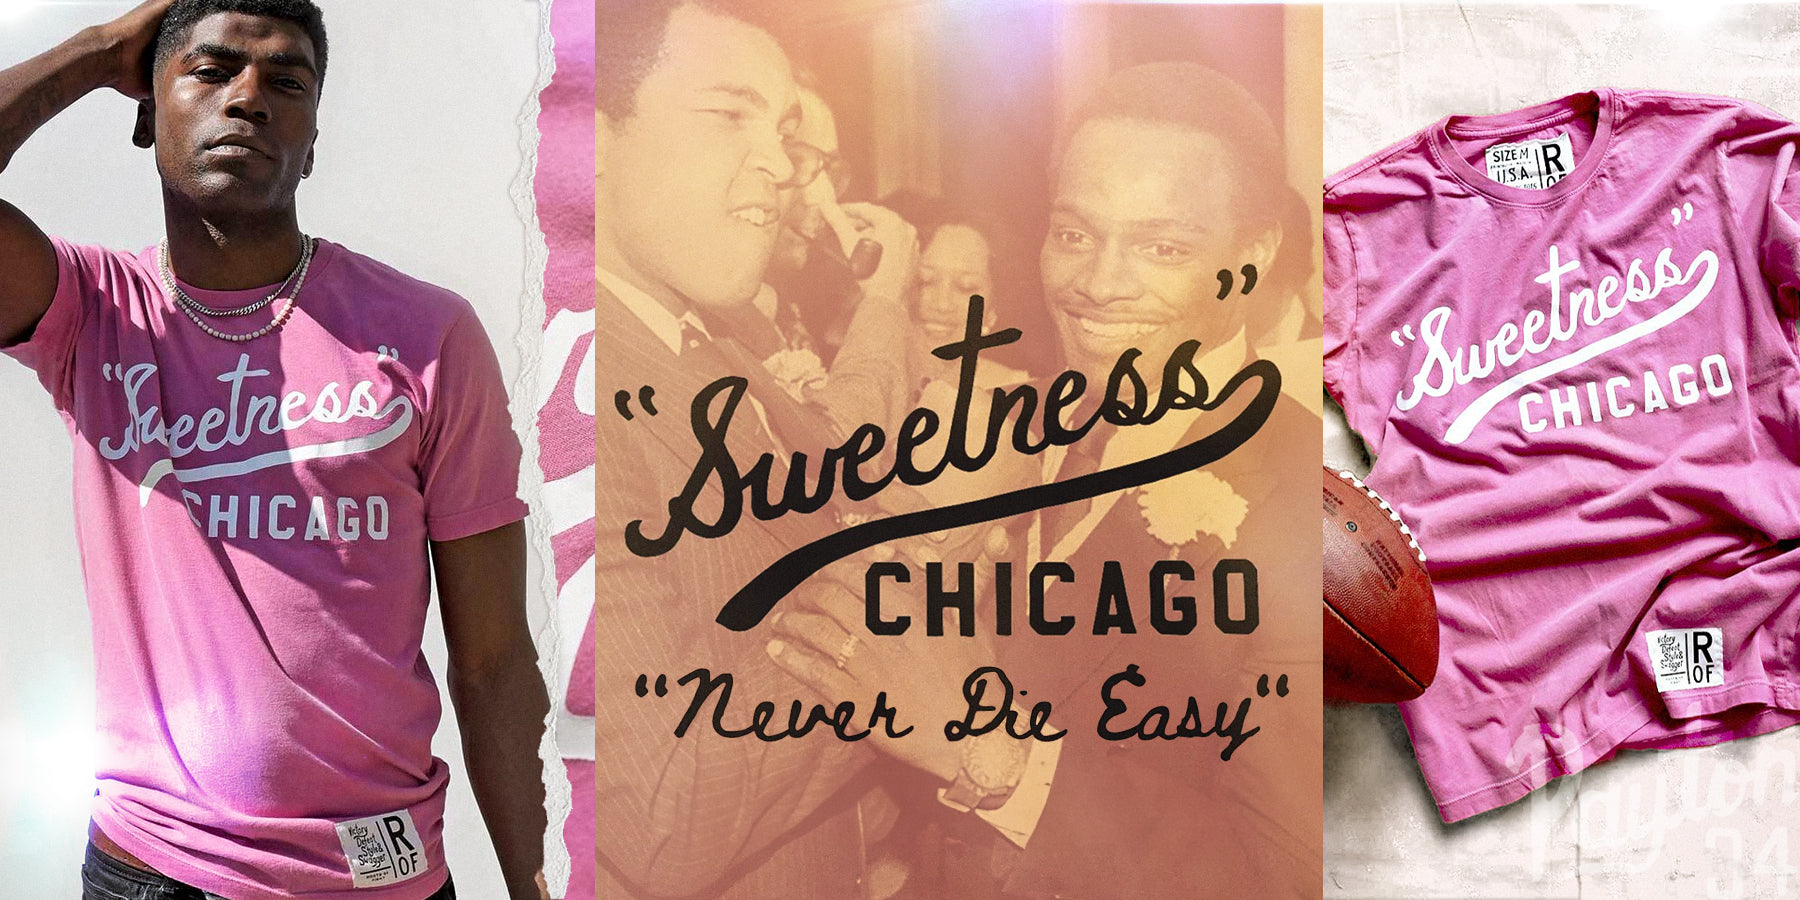 Man wearing a pink 'Sweetness Chicago' T-shirt, with vintage photo and similar shirt design.